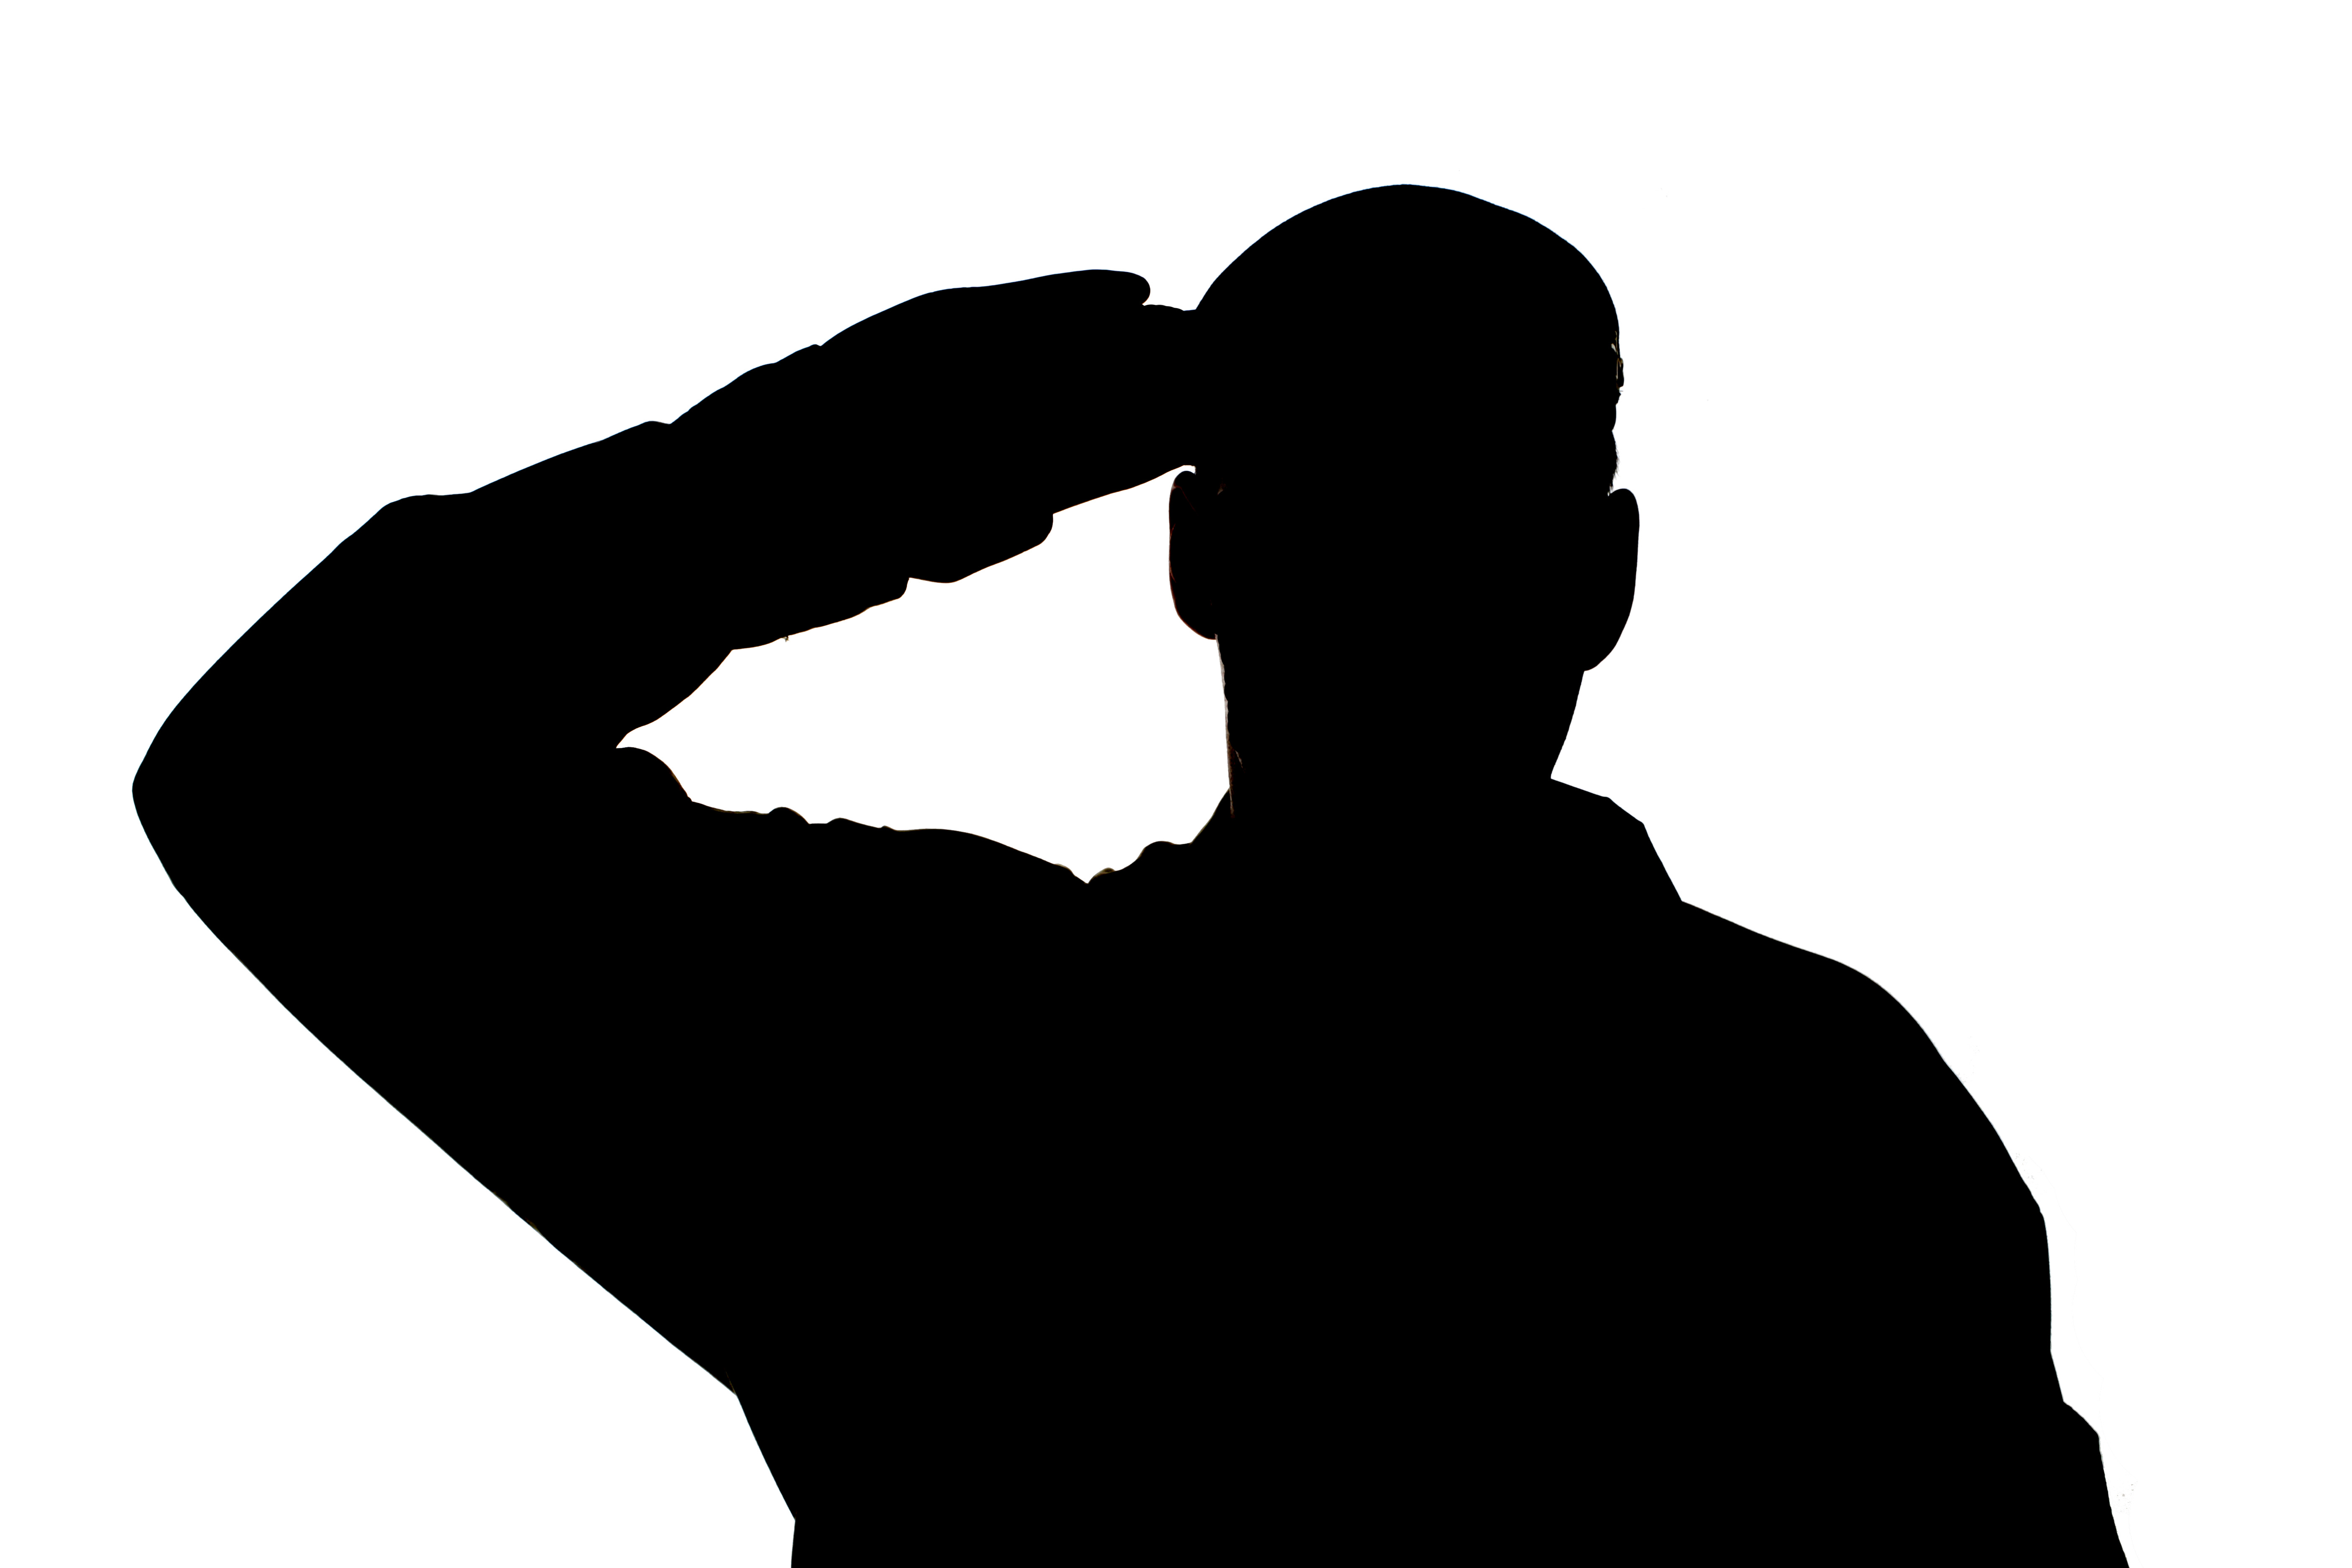 Us soldiers saluting silhouette high resolution clipart